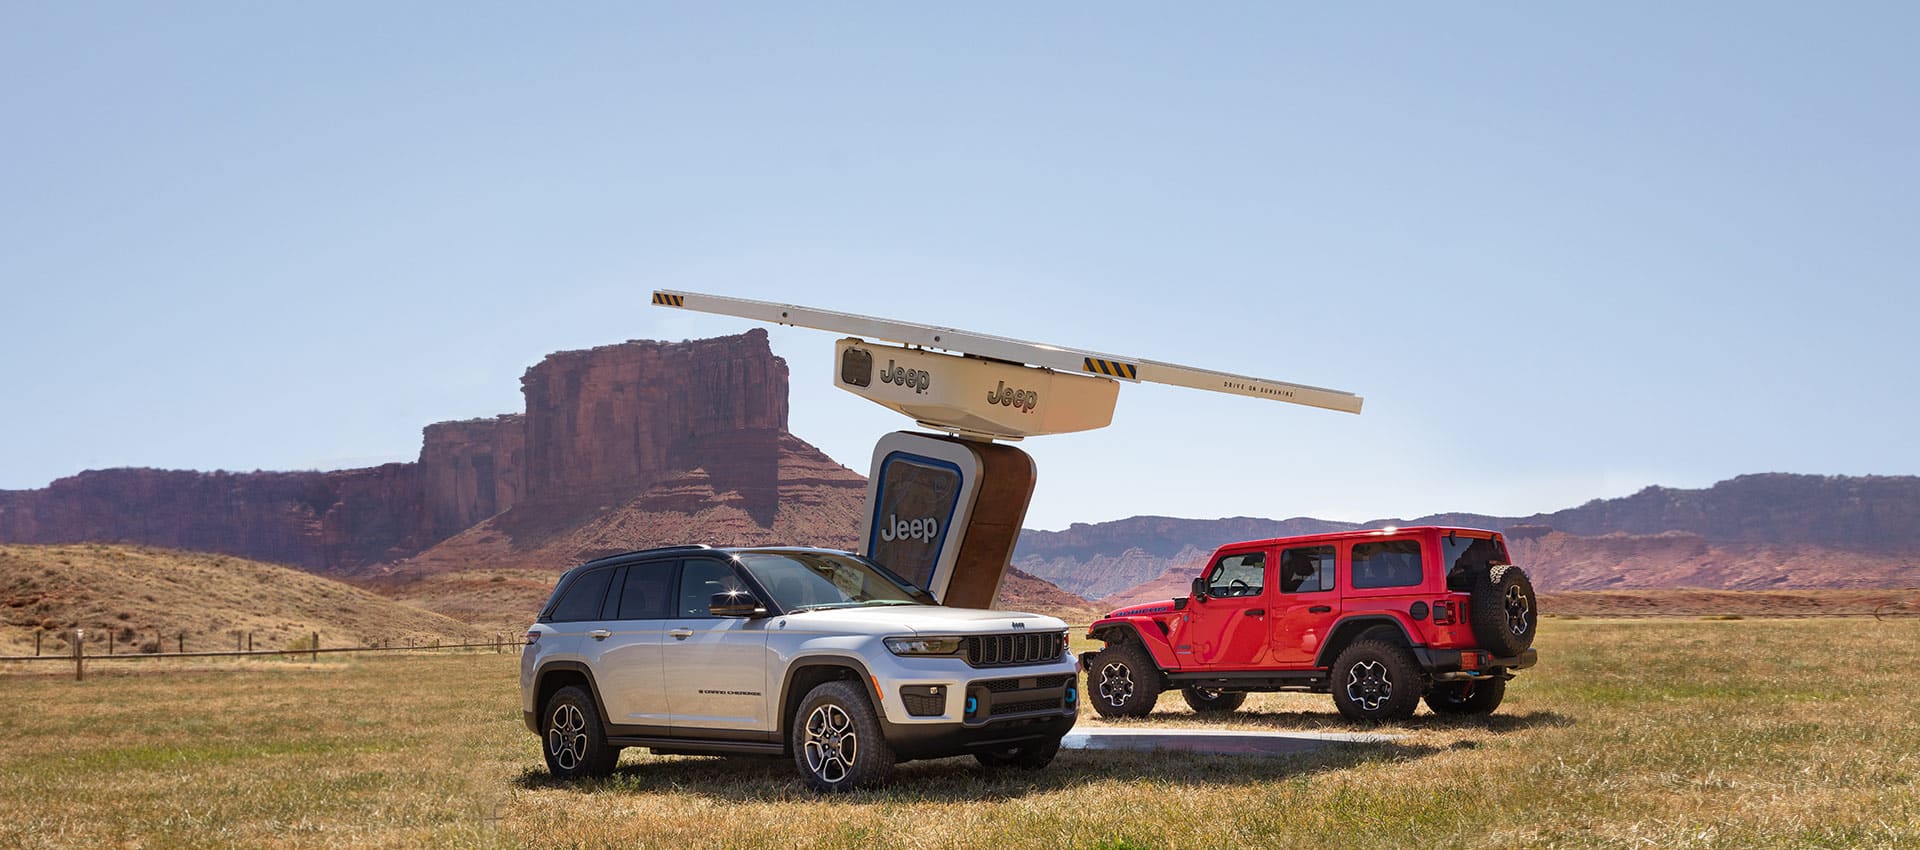 A 2022 Jeep Grand Cherokee Trailhawk 4xe and a 2022 Jeep Wrangler Rubicon 4xe parked off-road at a Jeep-branded solar-powered charging station in the mountains.